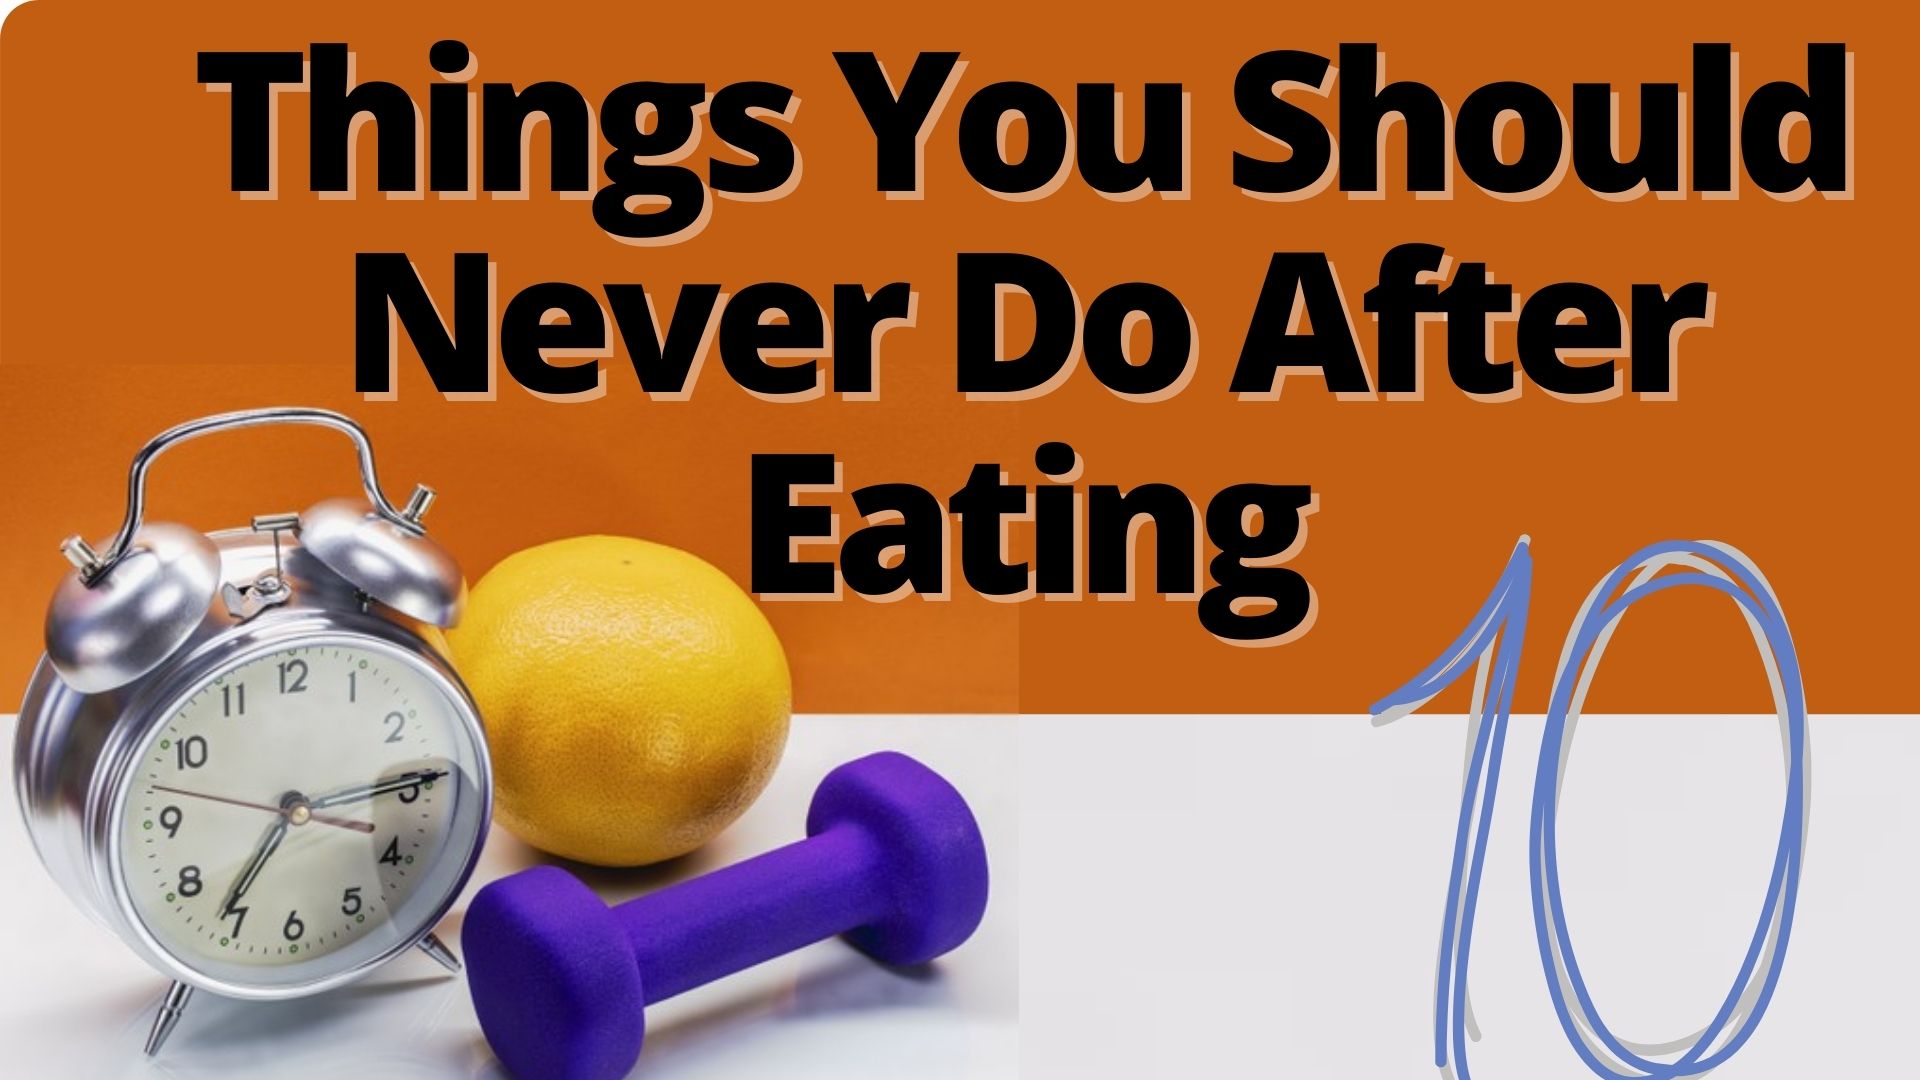 #10 Things You Should Never Do After Eating a Meal